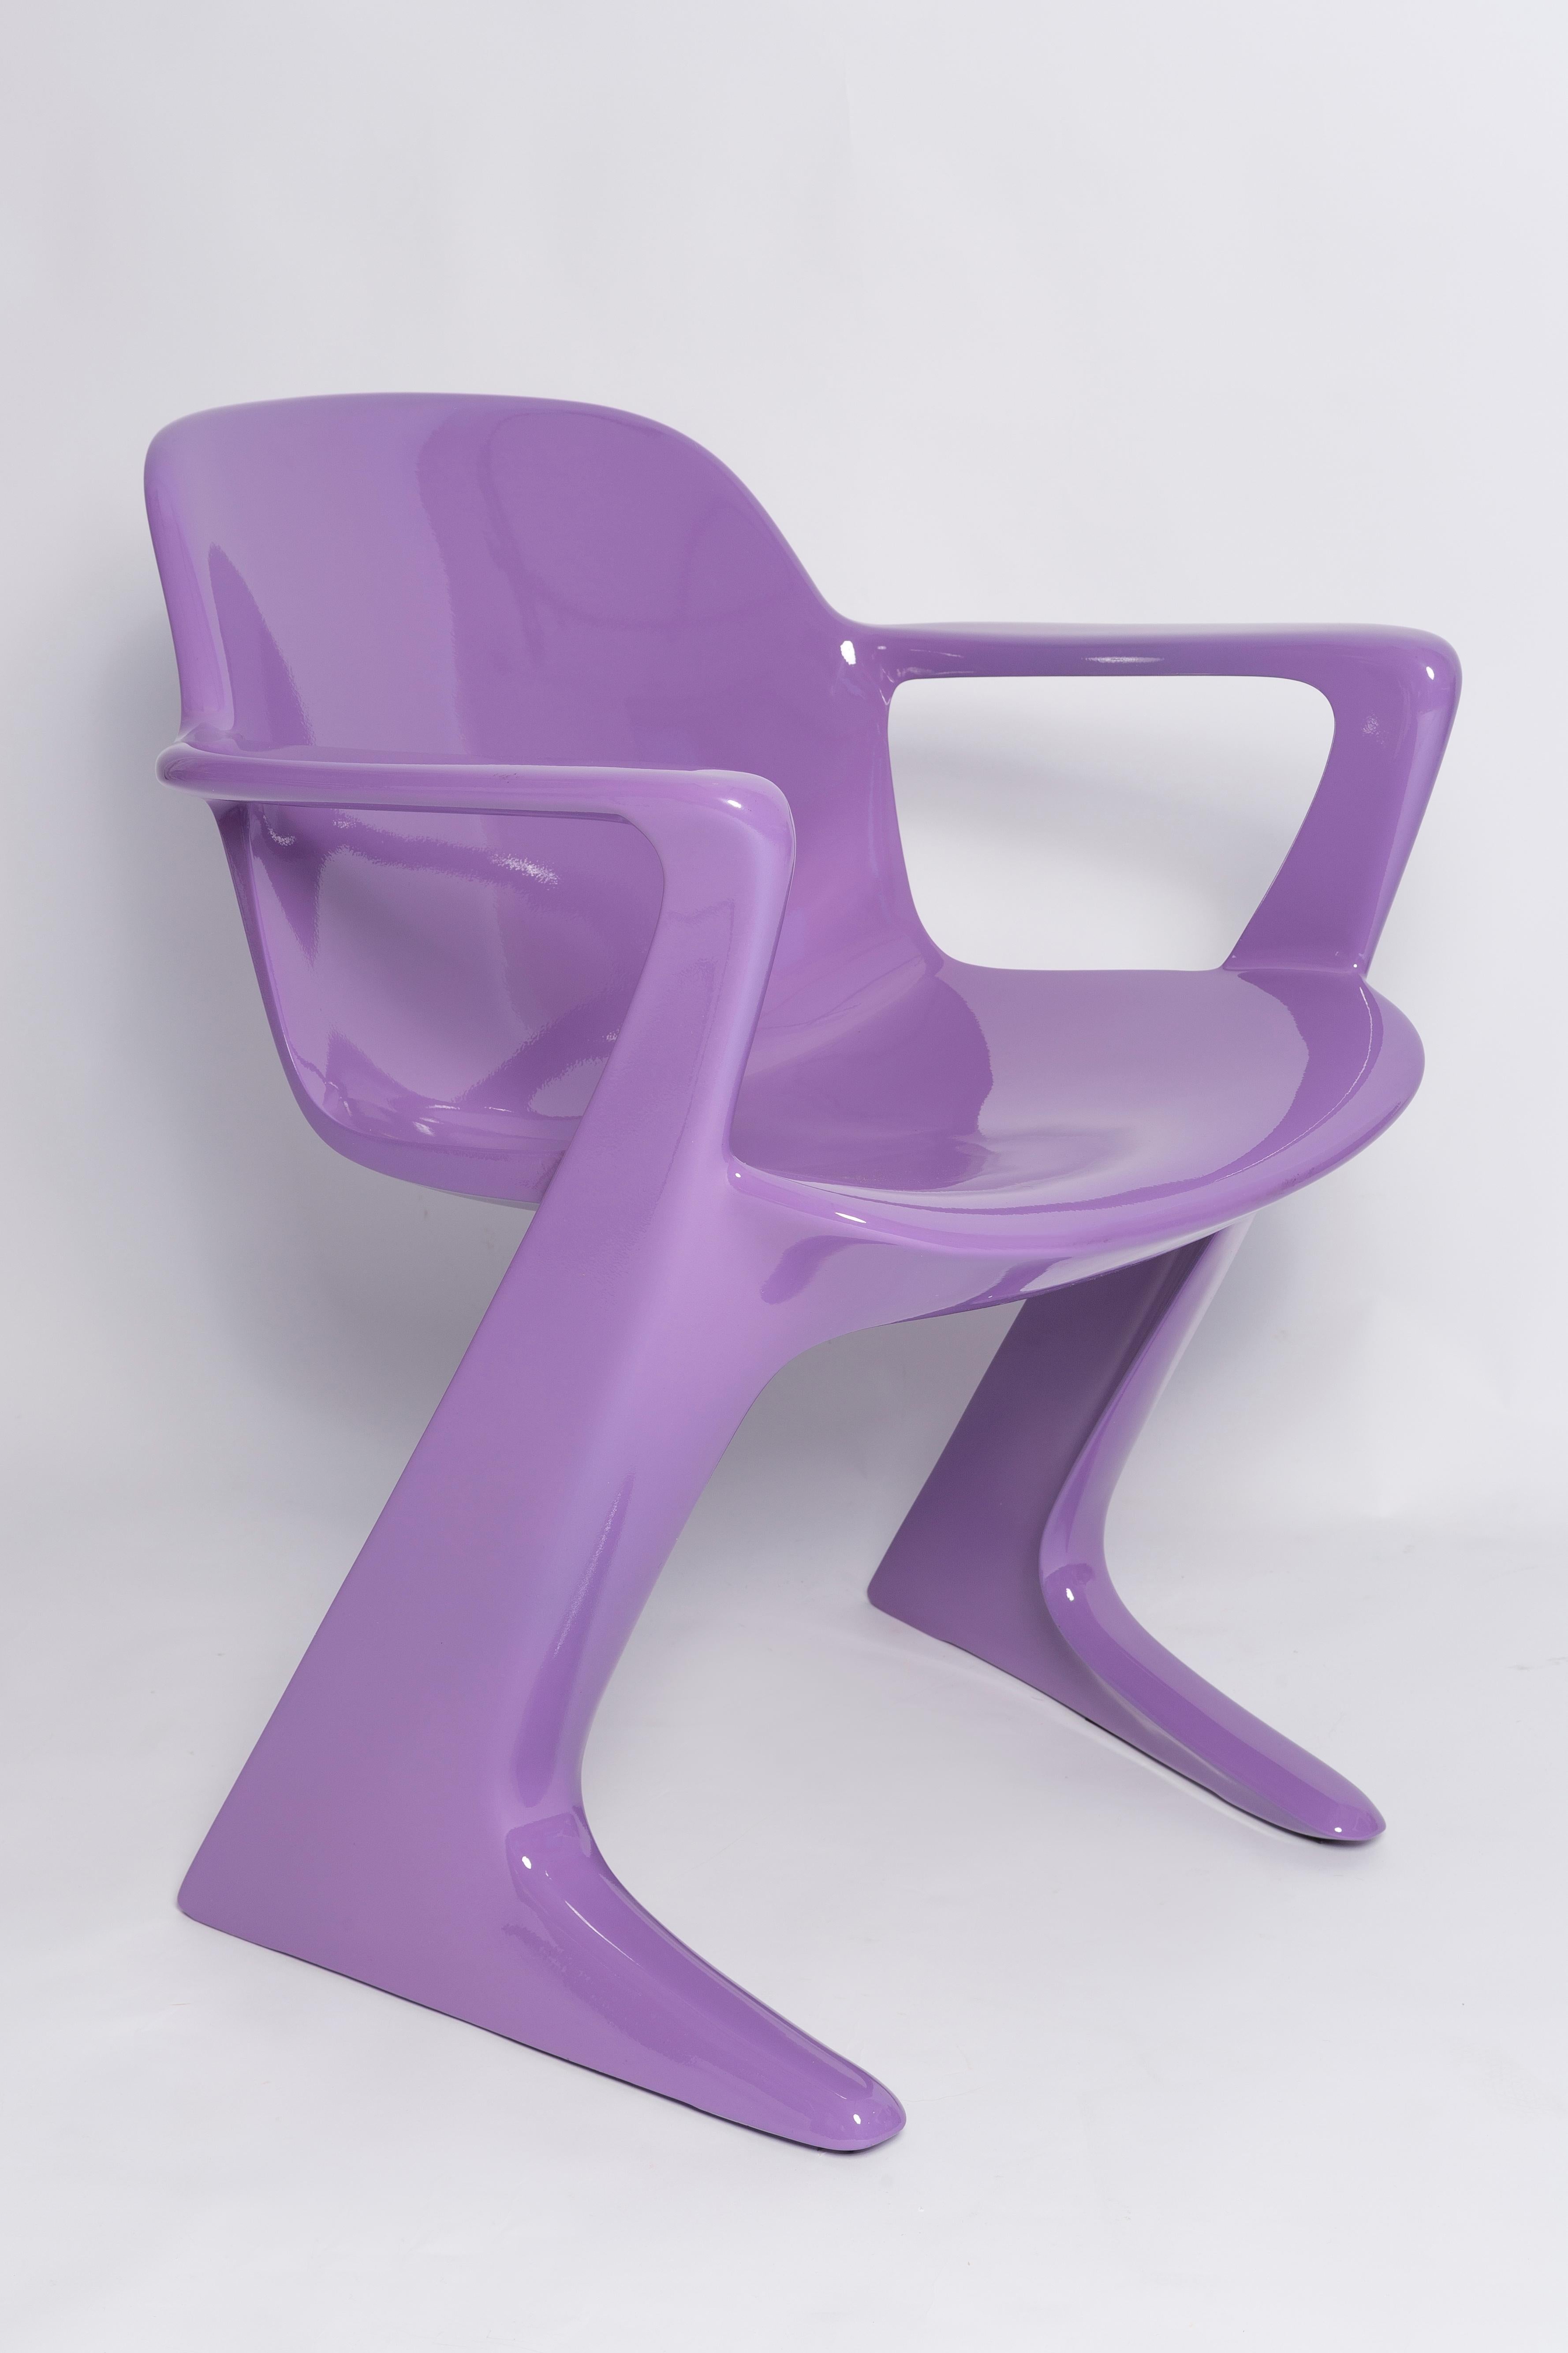 This model is called Z-chair. Designed in 1968 in the GDR by Ernst Moeckl and Siegfried Mehl, German Version of the Panton chair. Also called kangaroo chair or variopur chair. Produced in eastern Germany.

The z.stuhl, designed by Ernst Moeckl